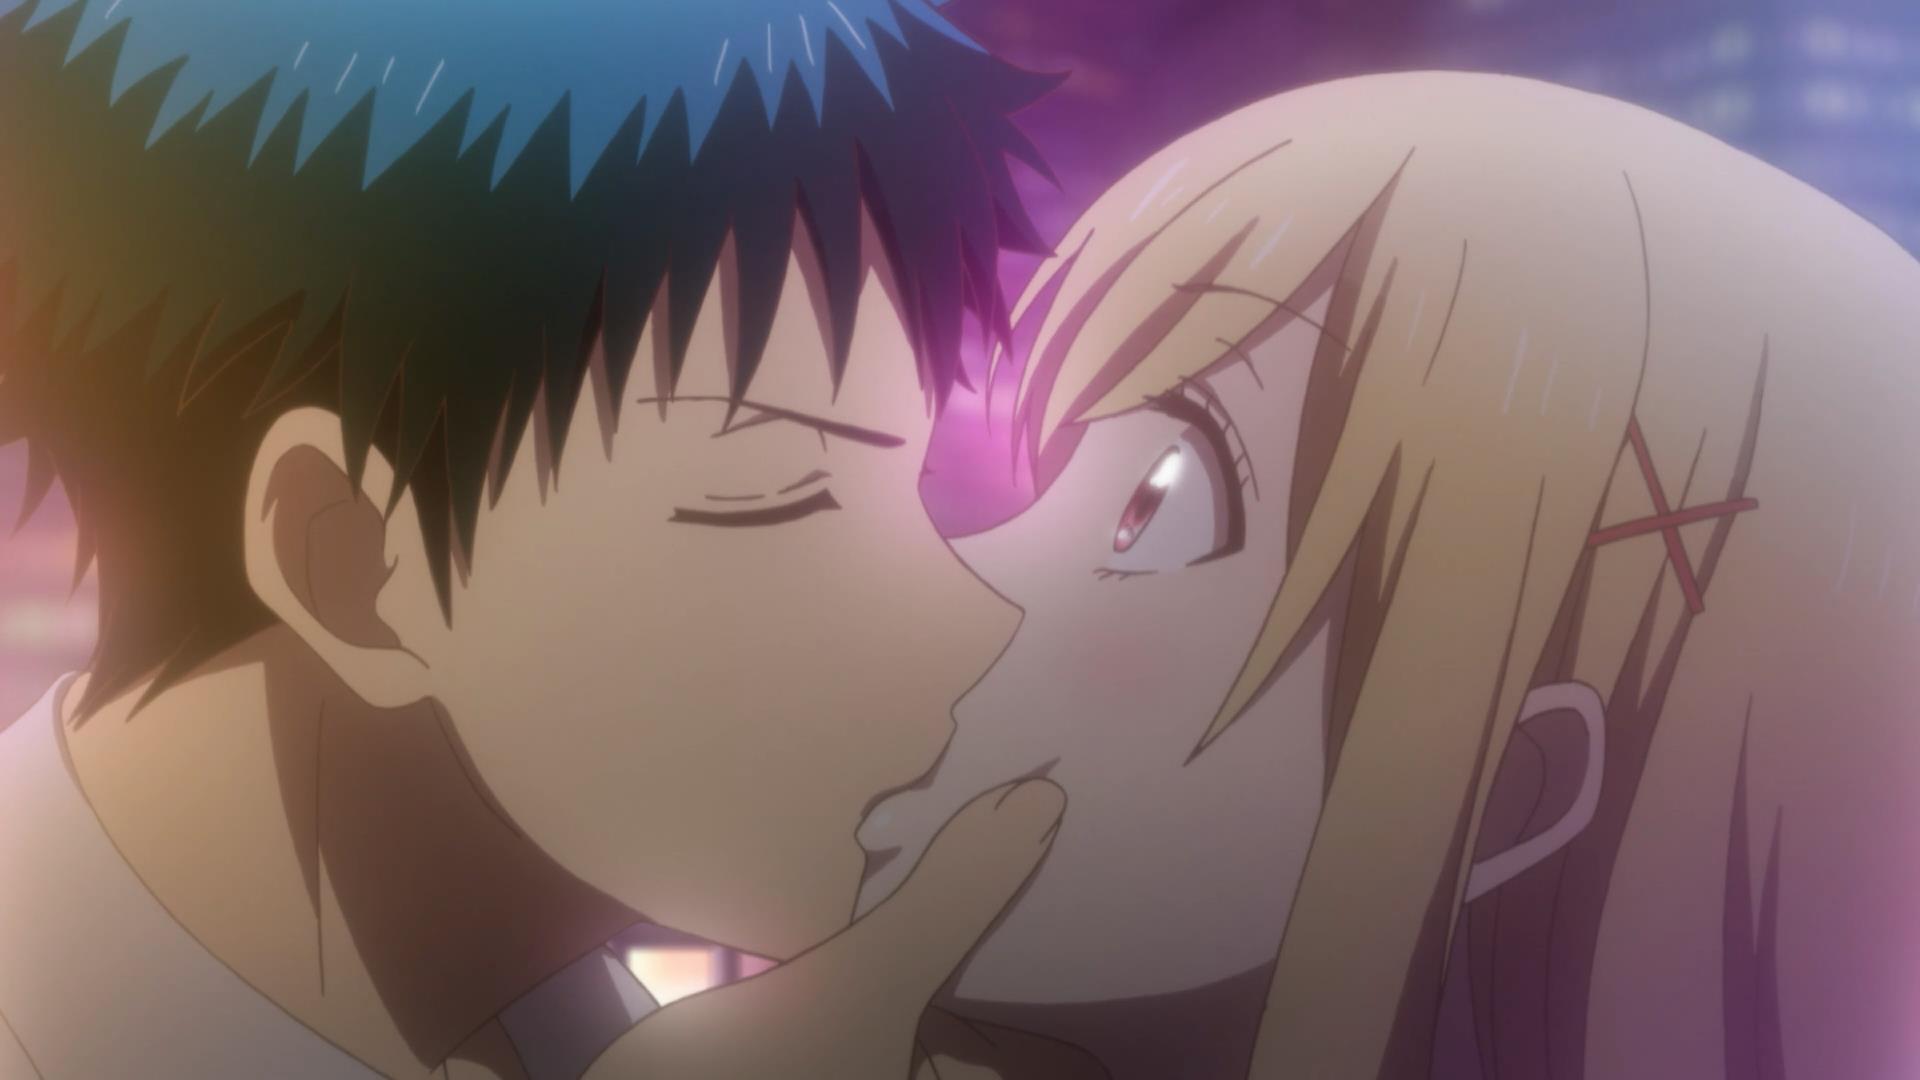 [HorribleSubs] Yamada-kun and the Seven Witches - 07 [1080p].mkv_snapshot_19.20_[2015.05.24_15.54.26]